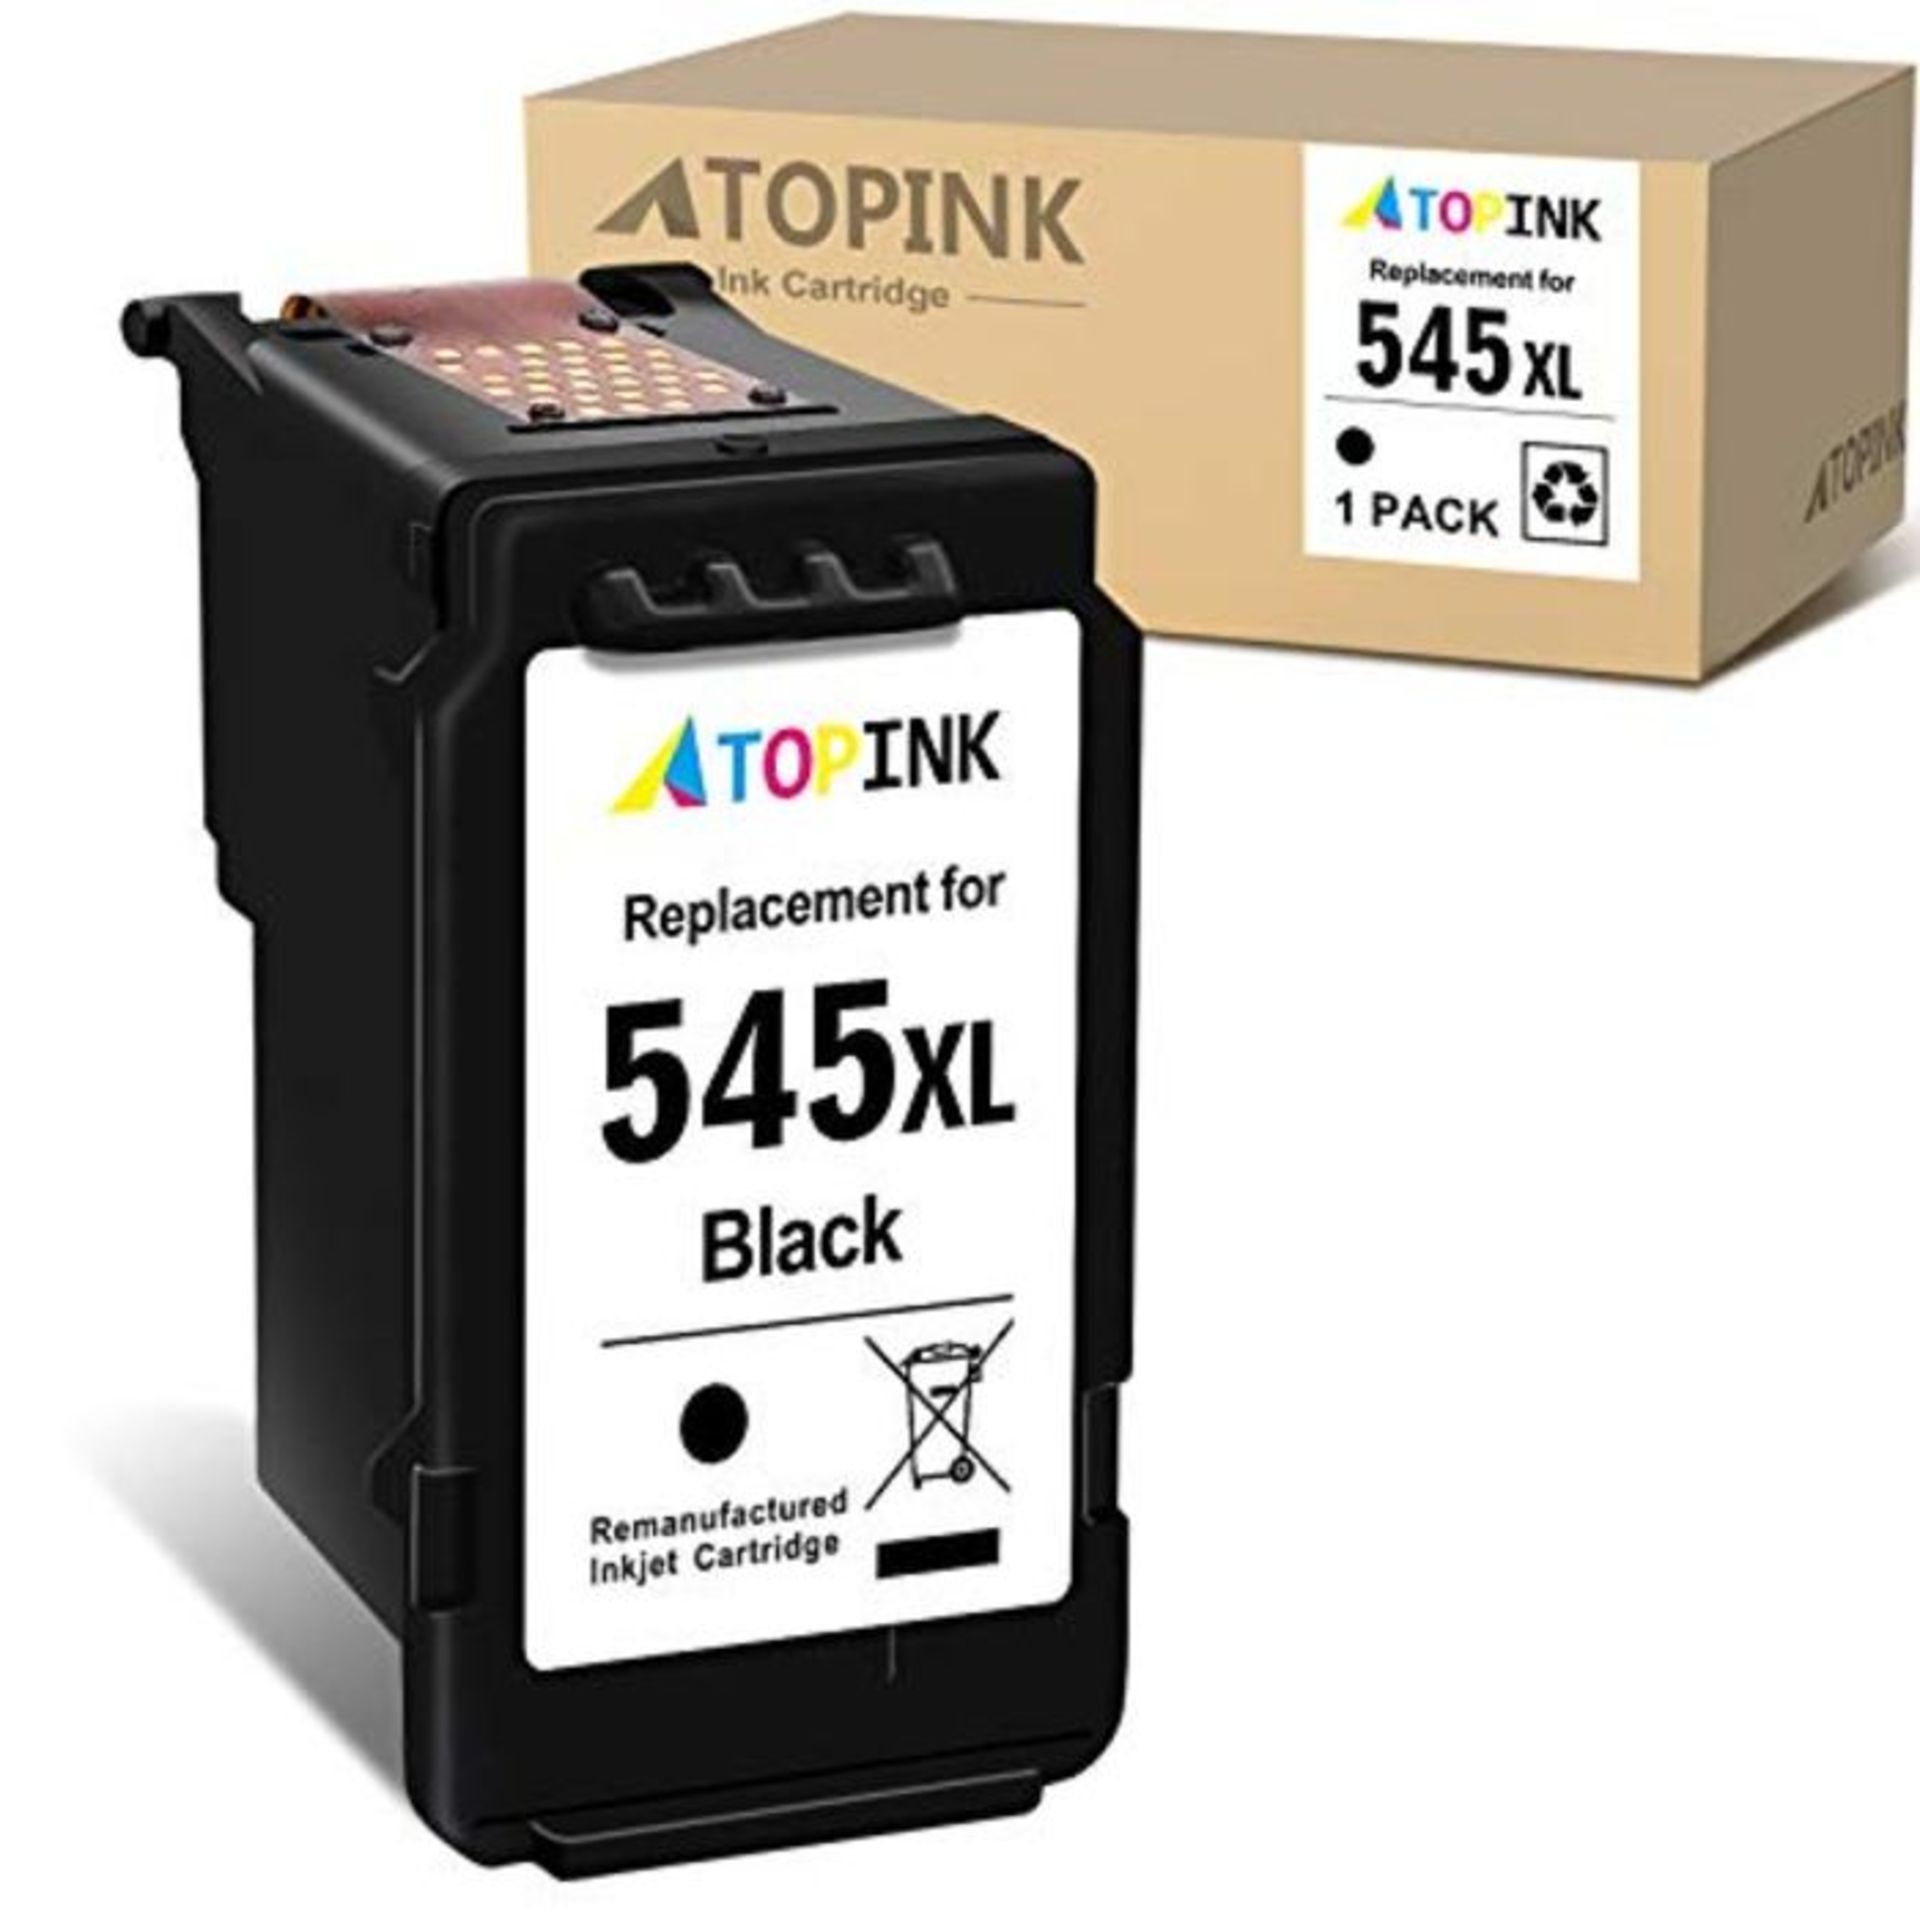 ATOPINK Remanufactured Ink Cartridge Replacement for Canon PG545XL 545XL for Canon Pix